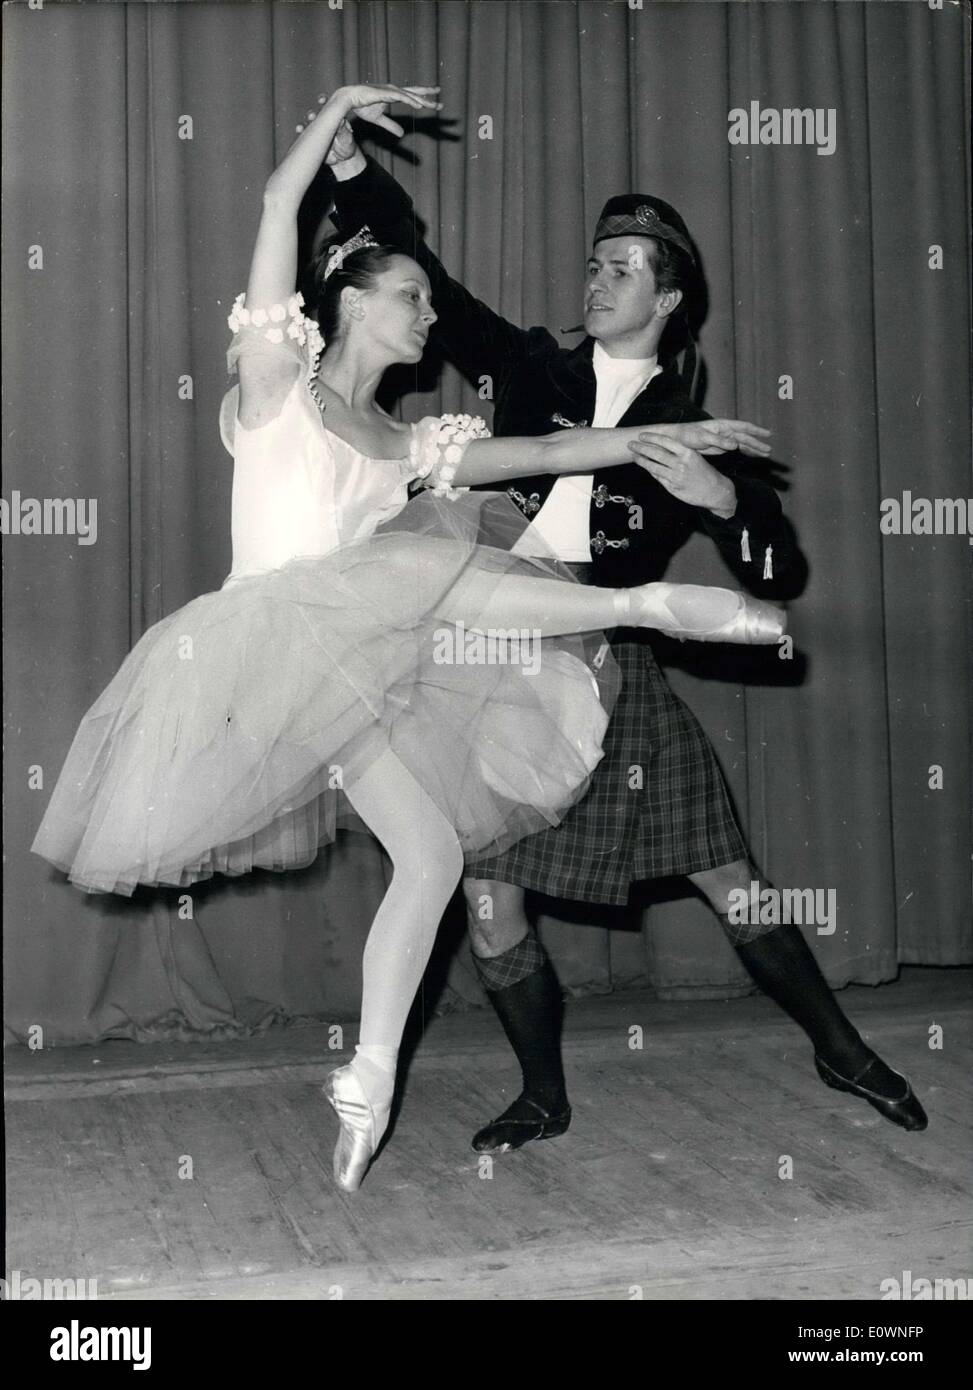 Dec. 16, 1963 - George Balanchine Stages Ballets At The Paris Opera: The American Choreographer George Balnchine came to Paris to stage 4 of his ballets, which he made famous with his New York Ballet Theatre. The 4 ballets being rehearsed at the Opera are based on Chabrier (Bourree Fantastique), Hindemith (The Four Temperaments), Mendelssohn (Scottish Symphony) and J.s. Bach (Concerto Barocco). Photo shows Josette Amiel and Flemming Flindt during rehearsals. Stock Photo